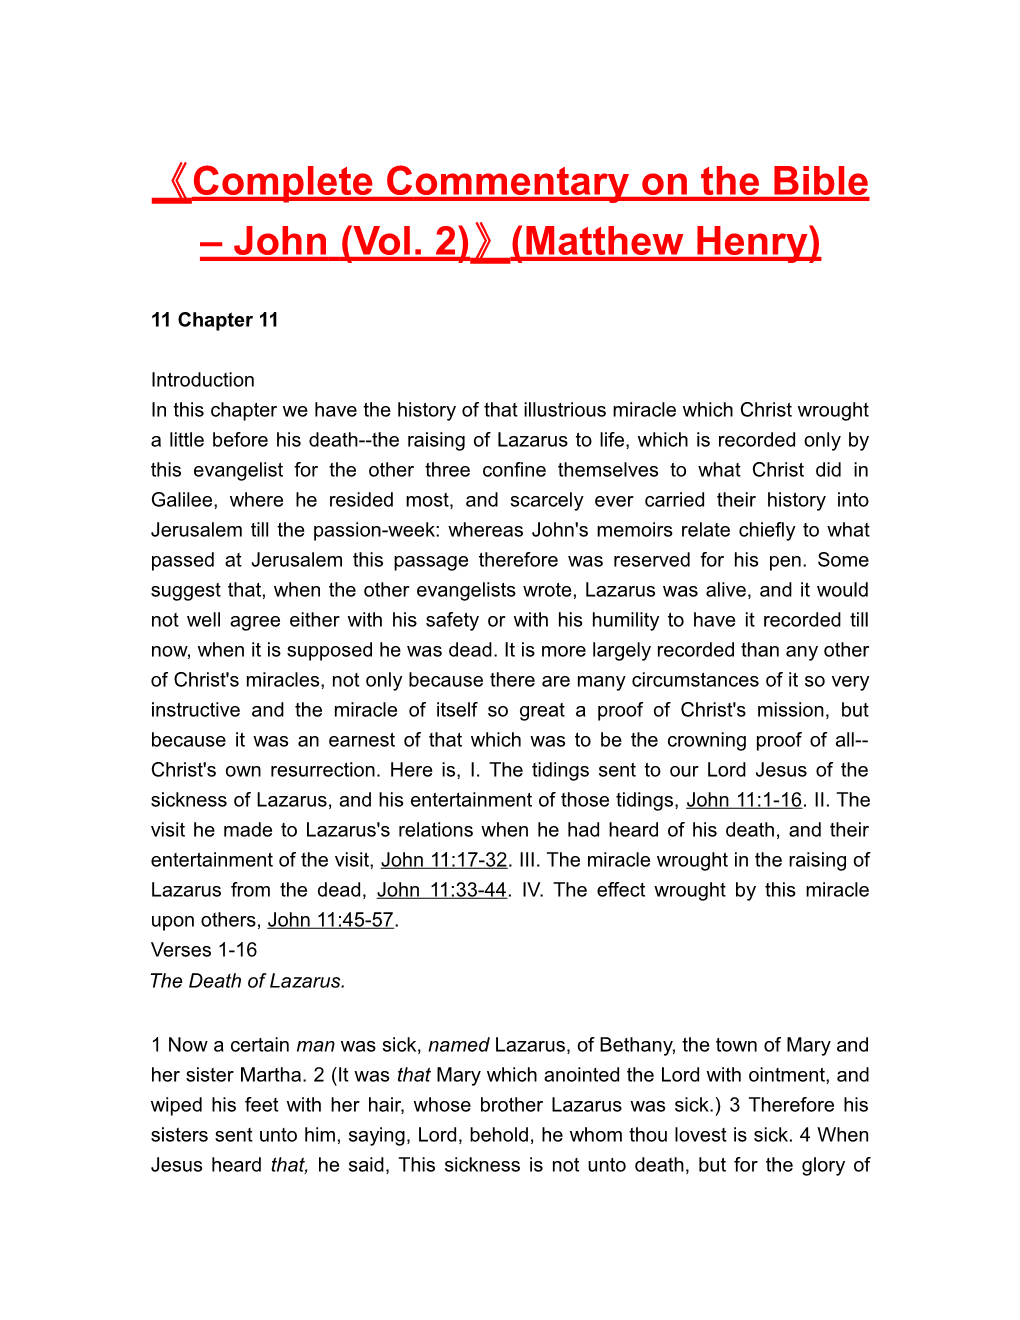 Complete Commentary on the Bible John (Vol. 2) (Matthew Henry)